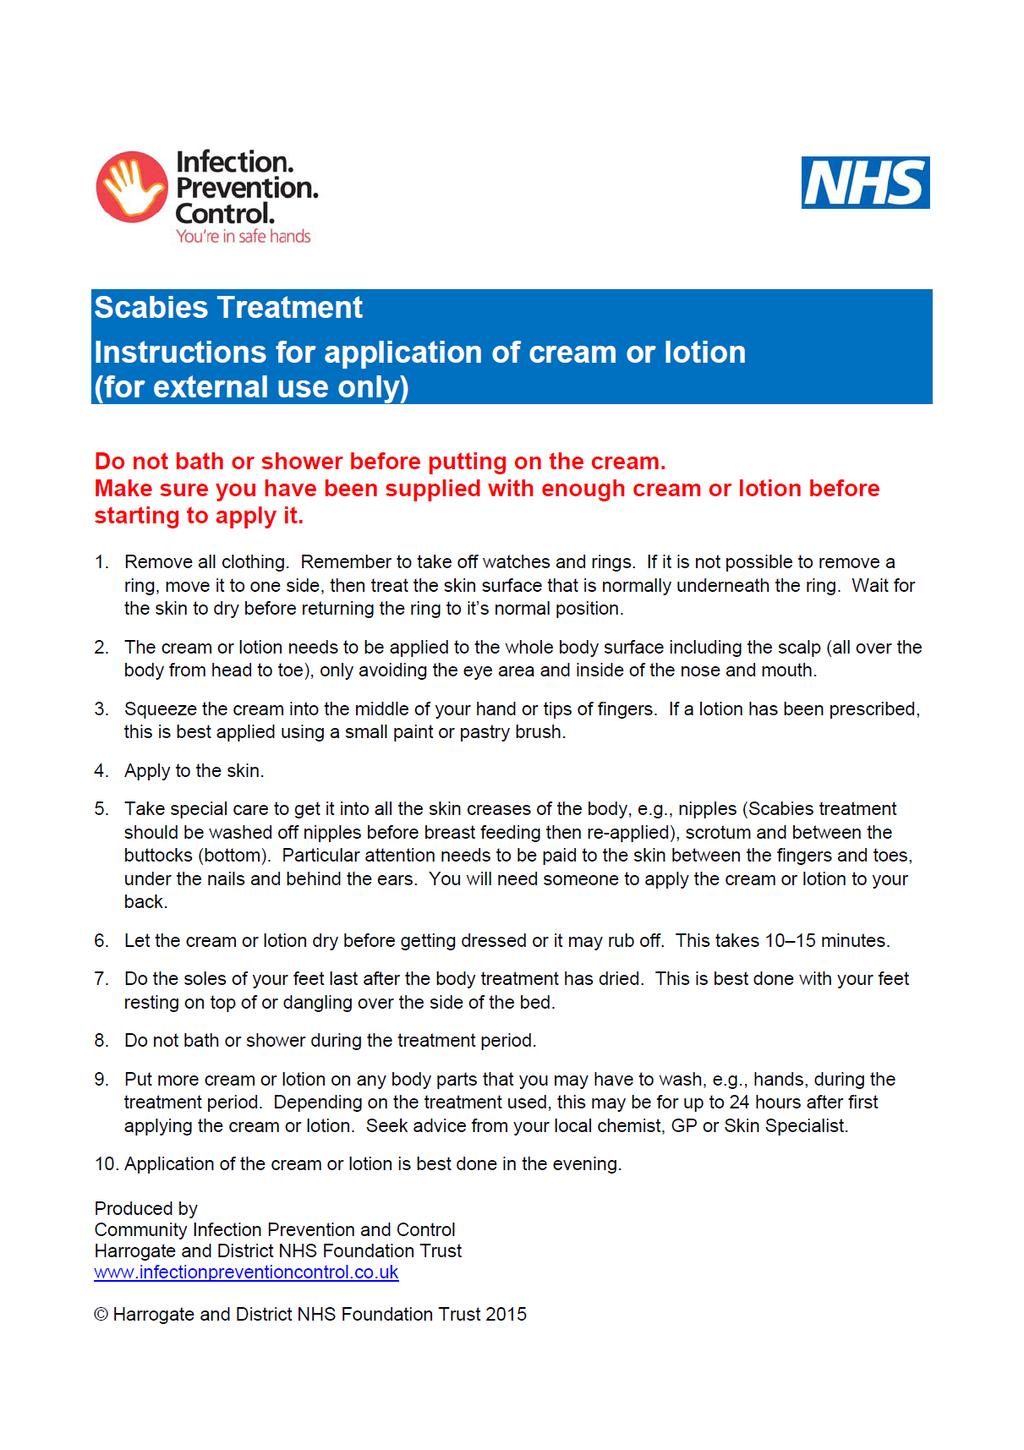 Appendix 1: Scabies Treatment Instructions for application of cream or lotion